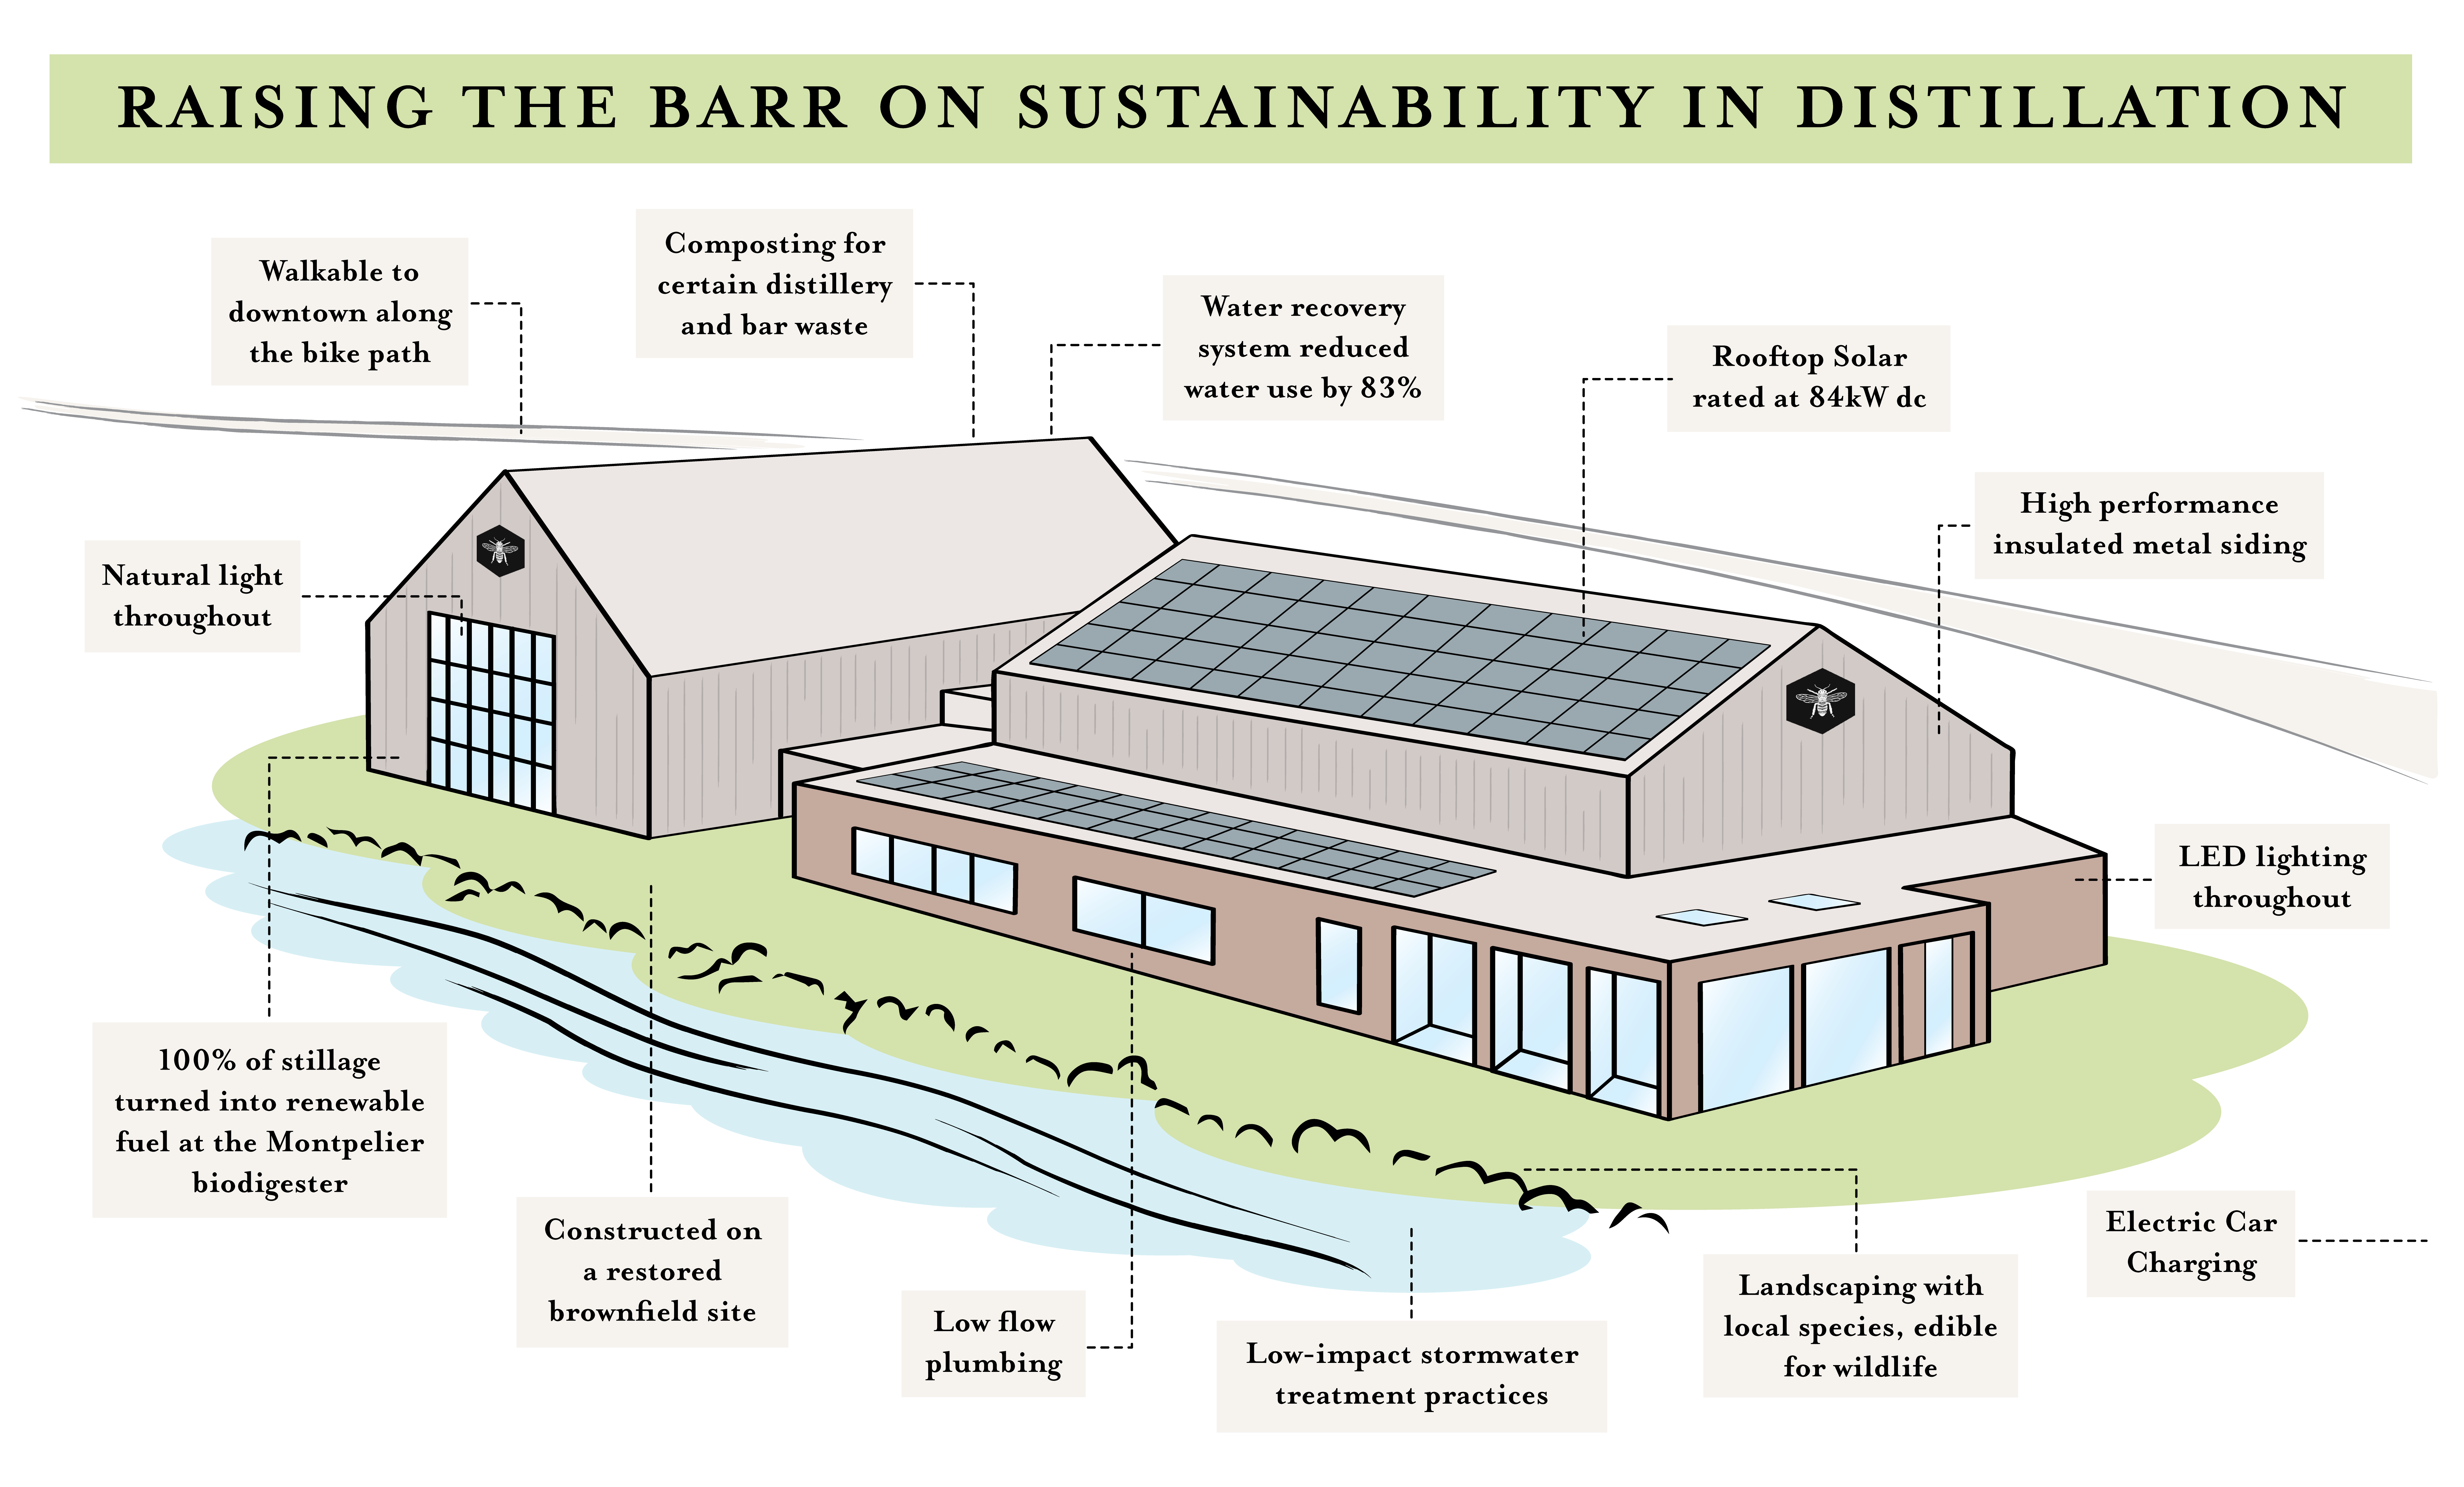 Barr Hill Distillery Sustainability Image